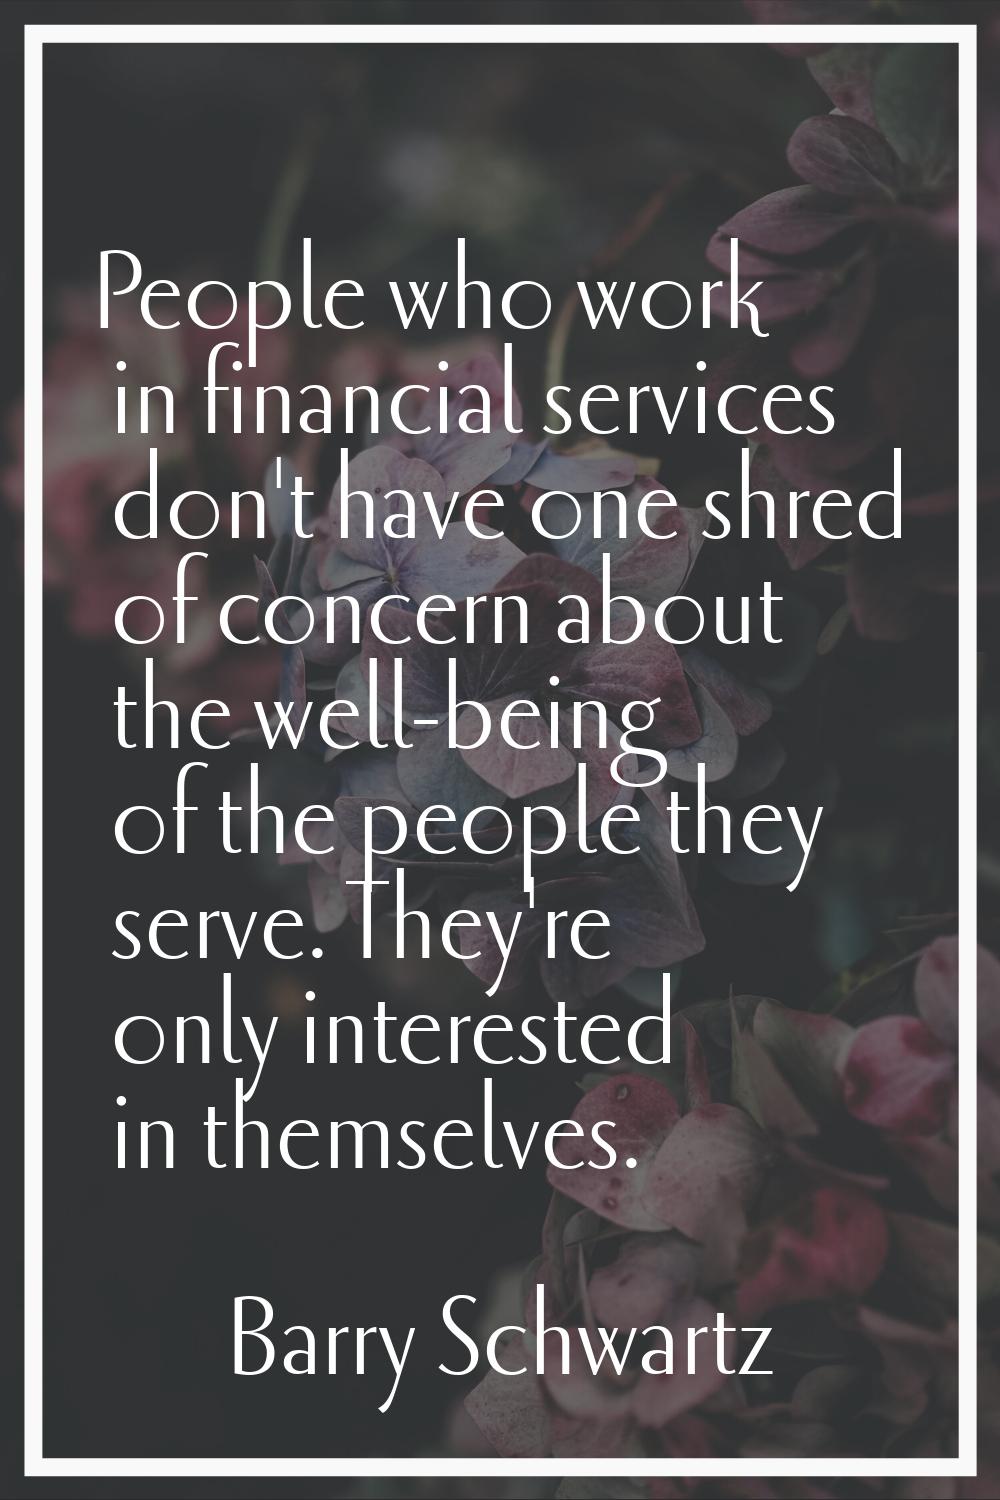 People who work in financial services don't have one shred of concern about the well-being of the p